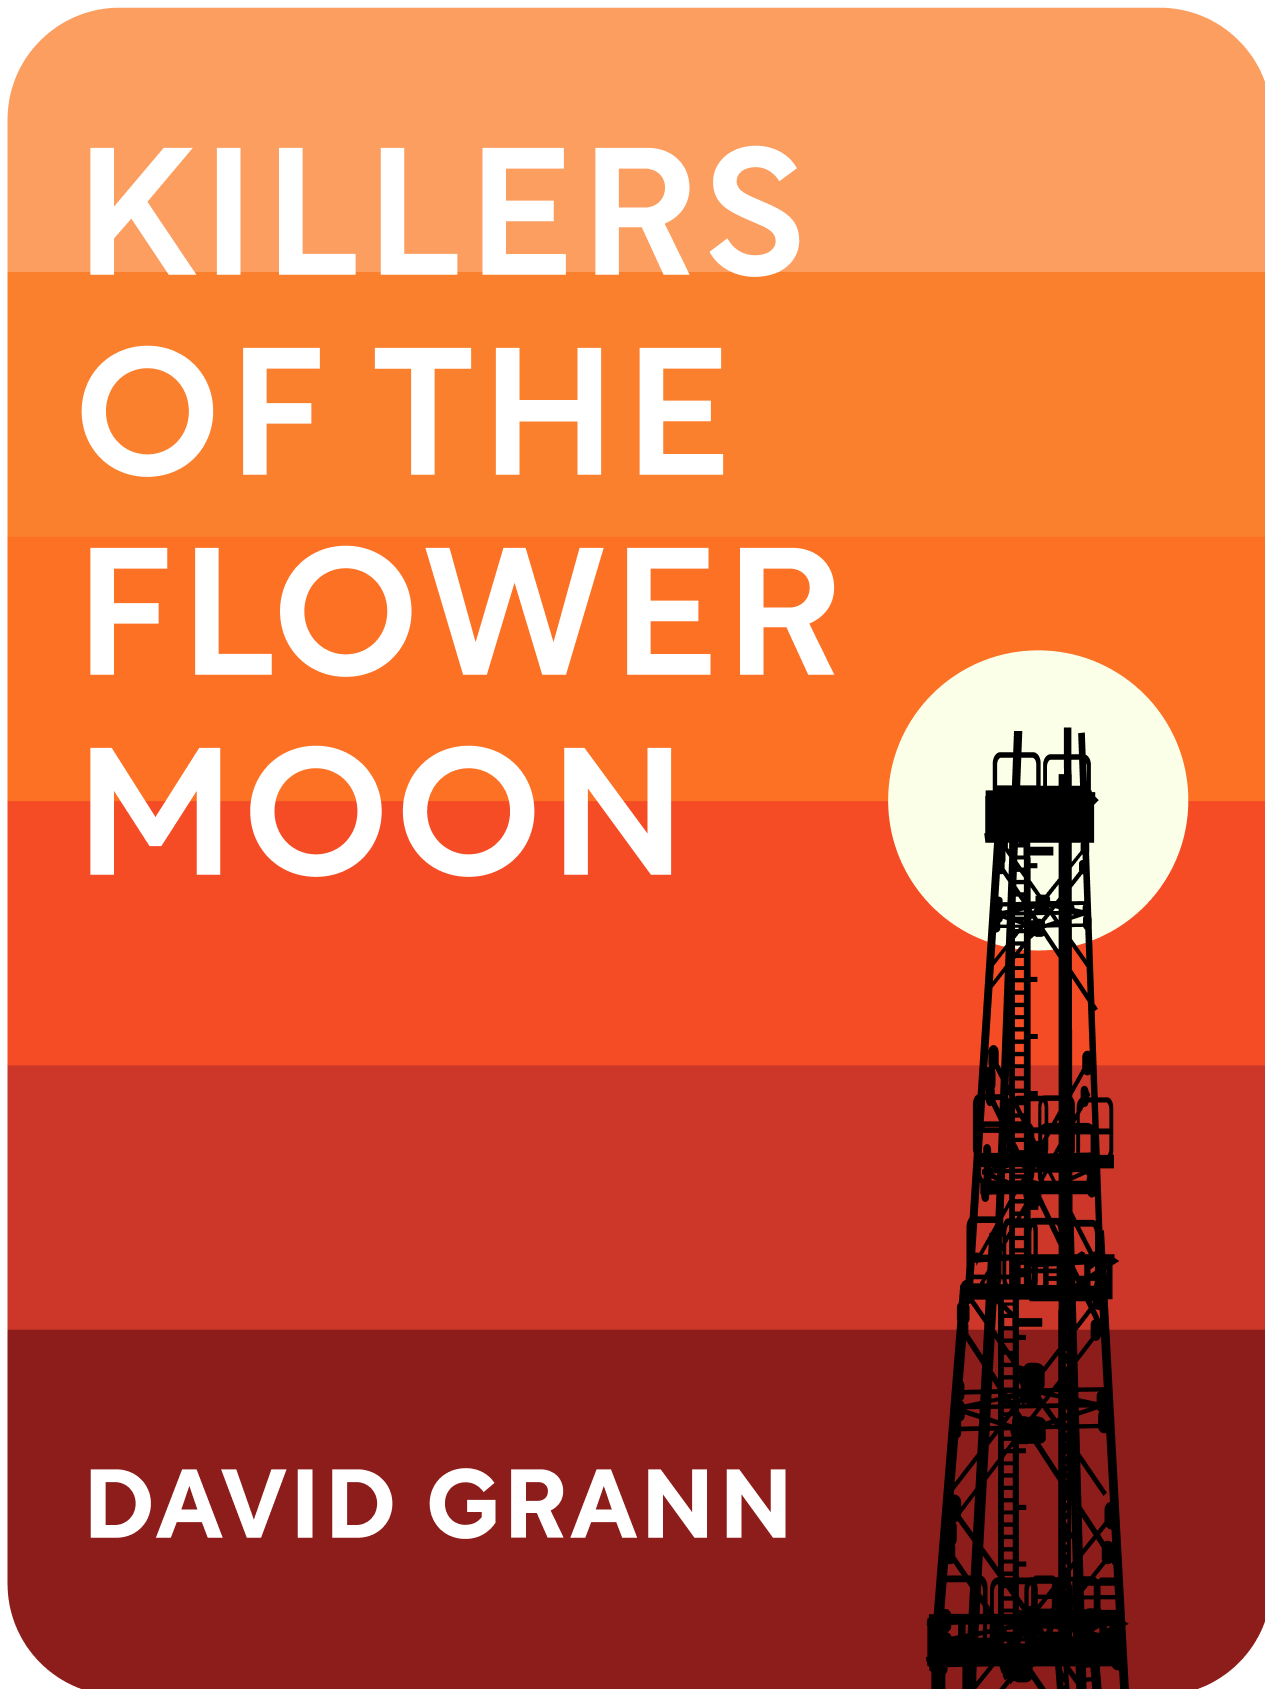 Killers of the Flower Moon Book Summary by David Grann